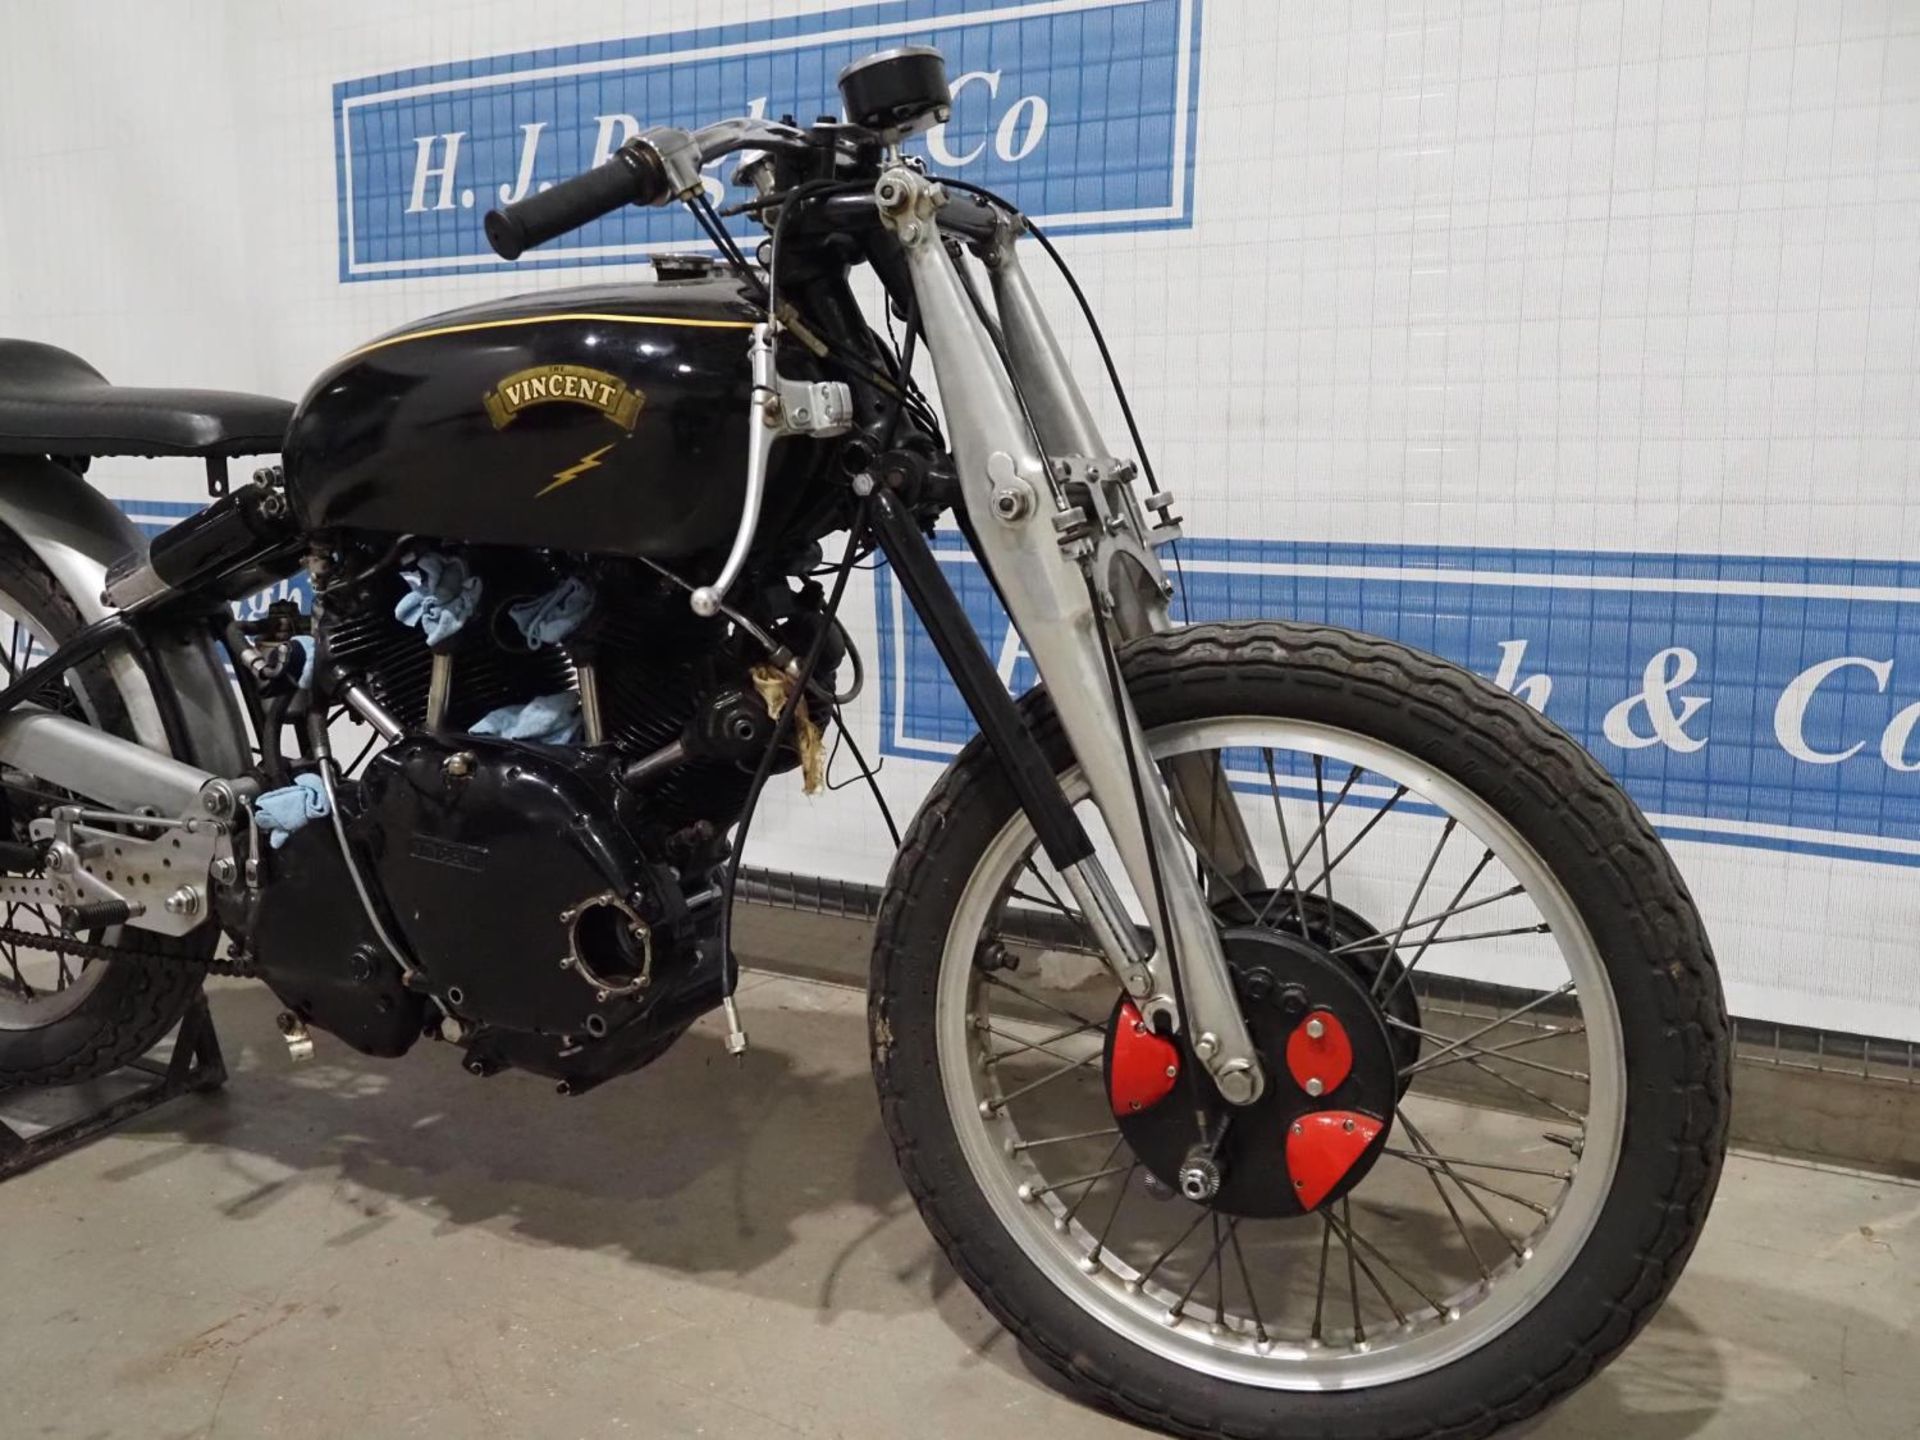 Vincent Rapid motorcycle project. Believed 1950. This is an unfinished project being sold from a - Image 3 of 15